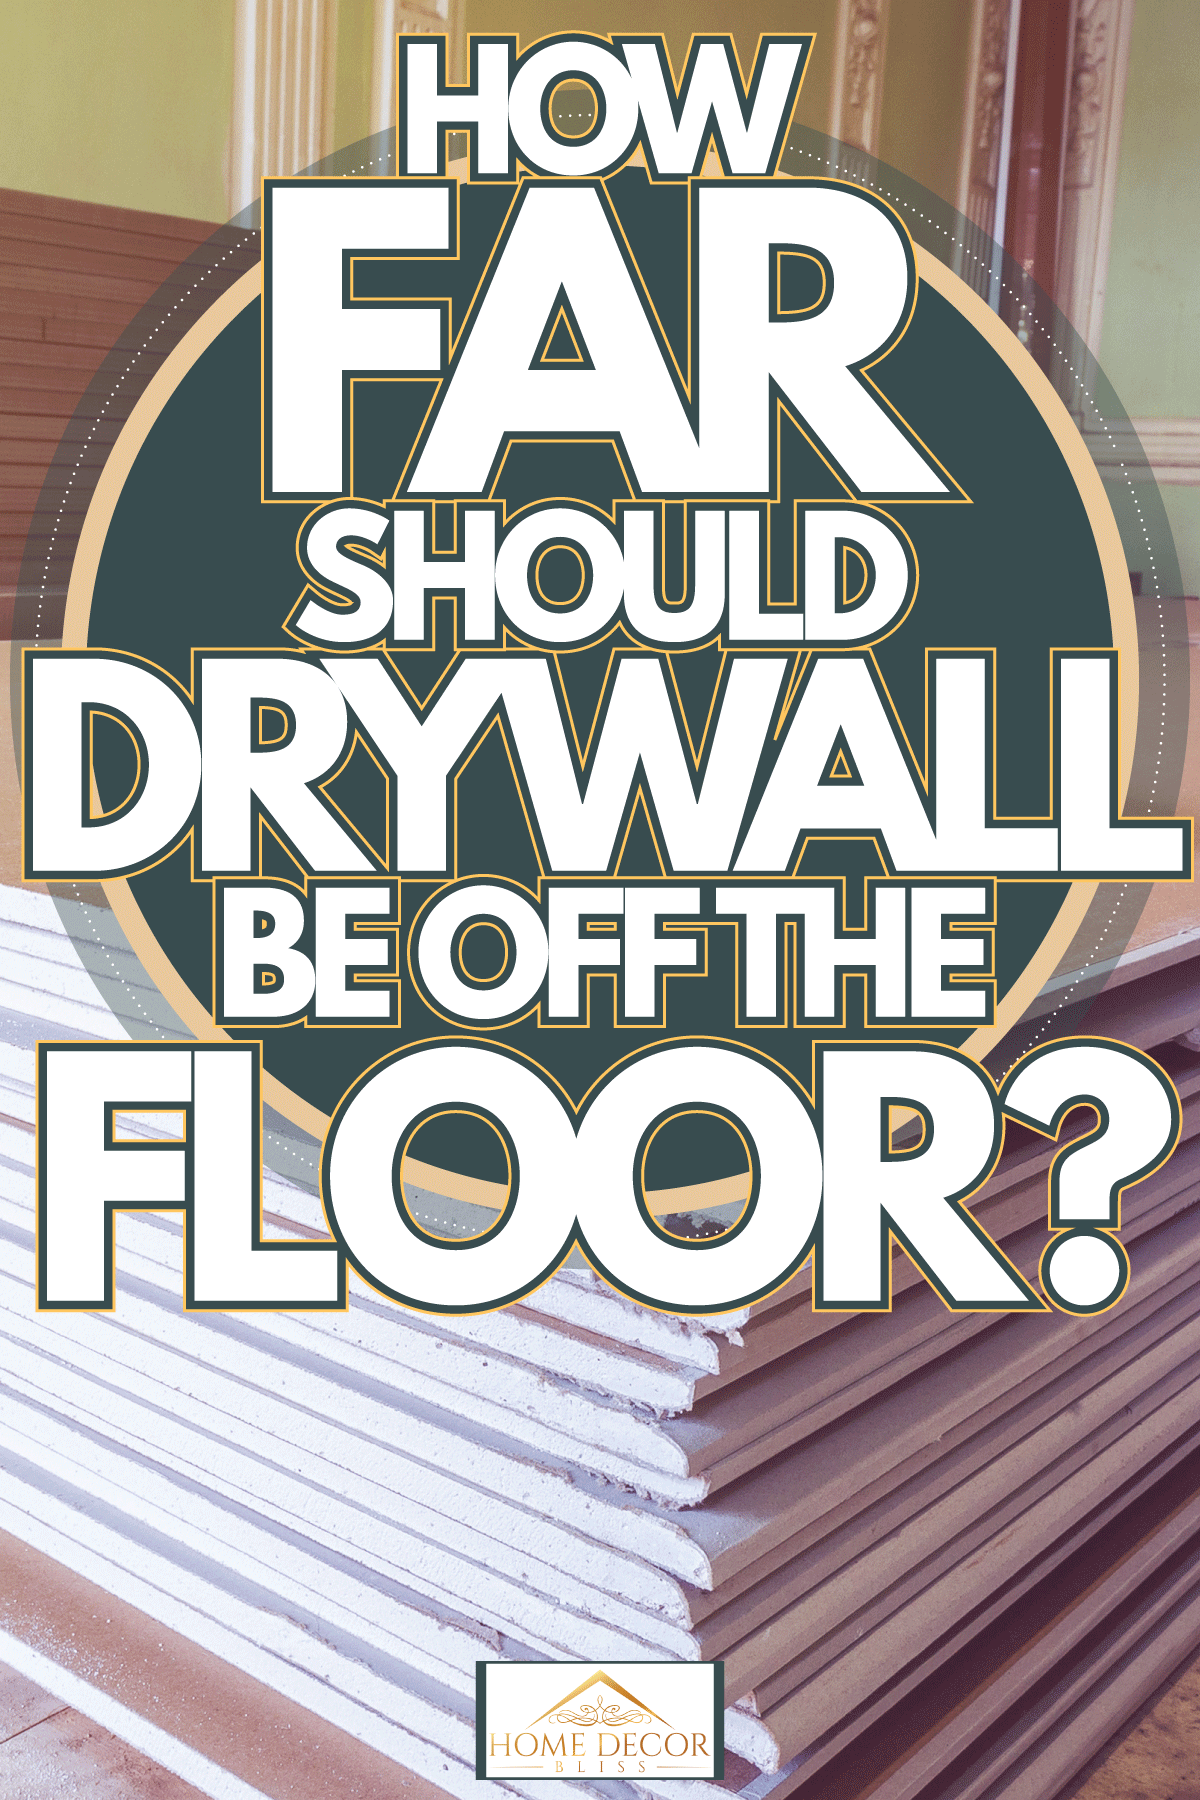 drywall are prepared for working process of installing plasterboard, How Far Should Drywall Be Off The Floor?